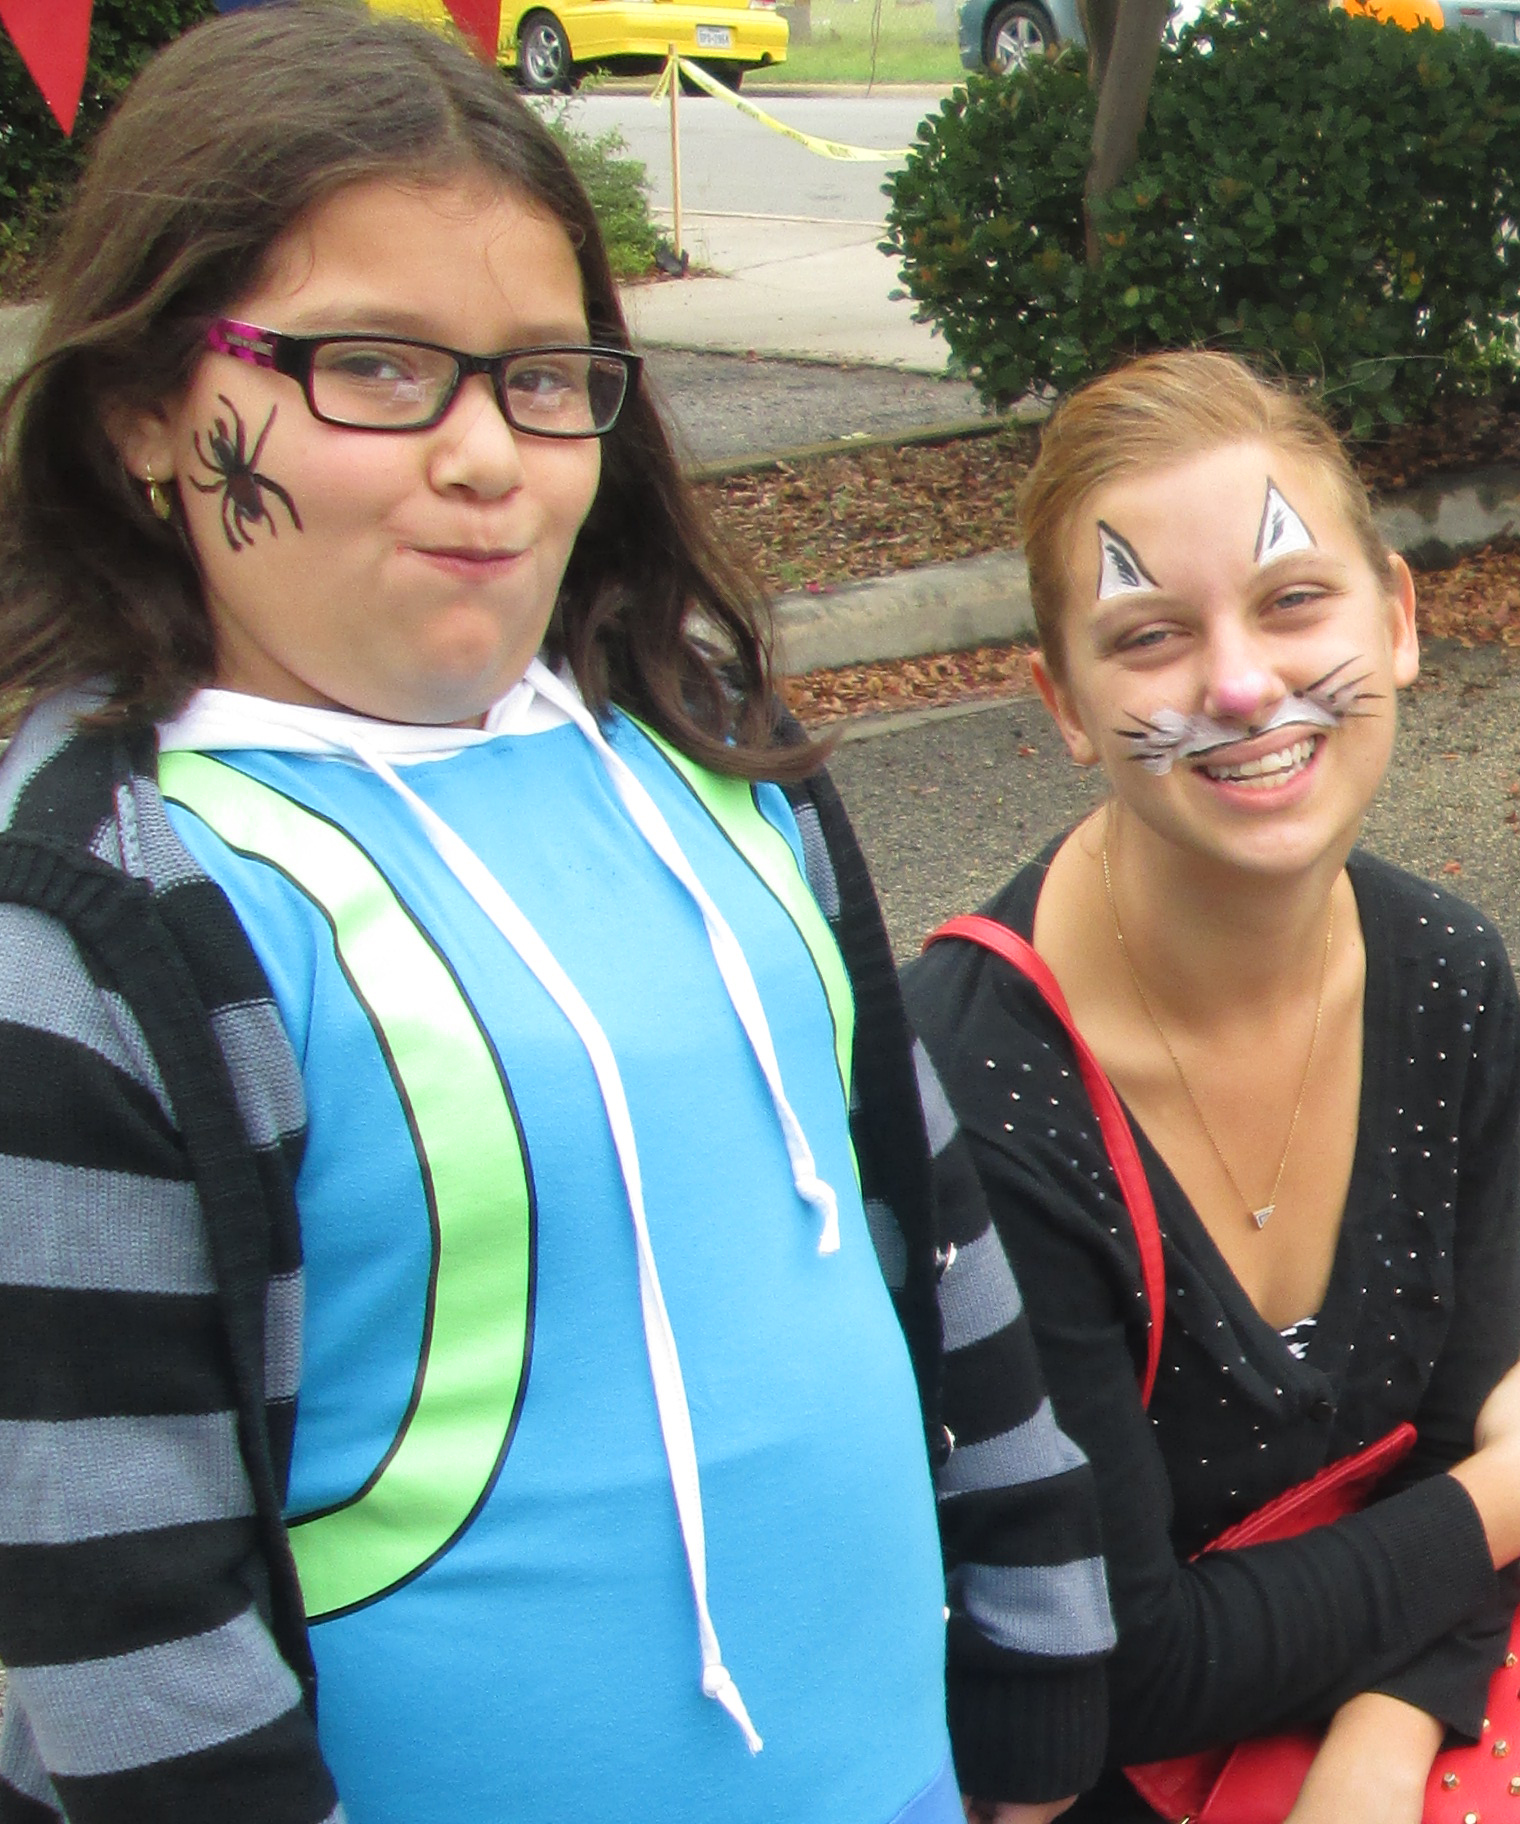 Little Sister gets spider face paint, while Big Sister opted for the cat look.